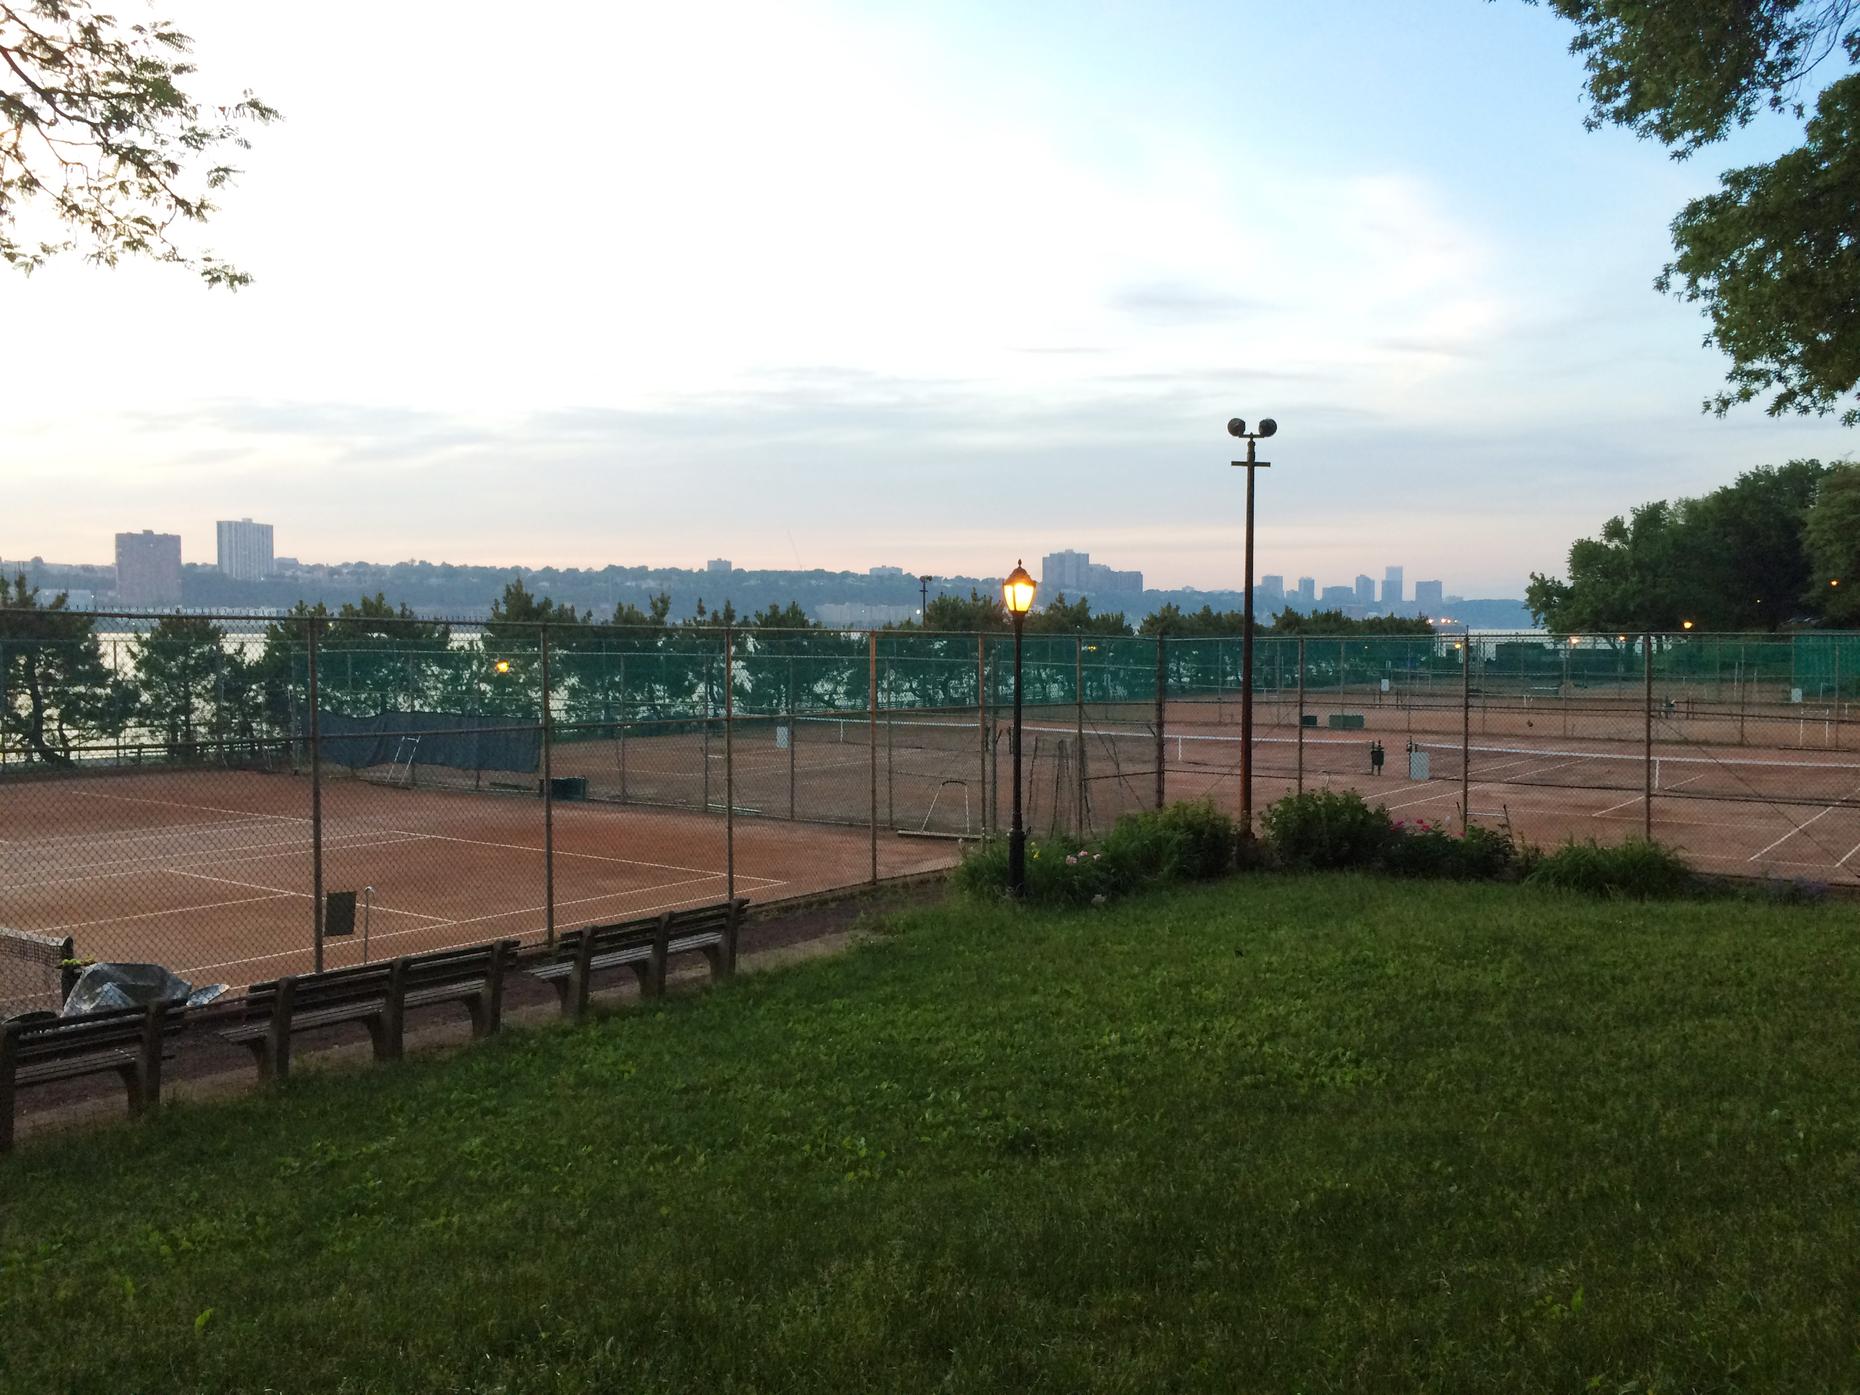 City Proposes Halving Cost of Tennis Permits WNYC New York Public